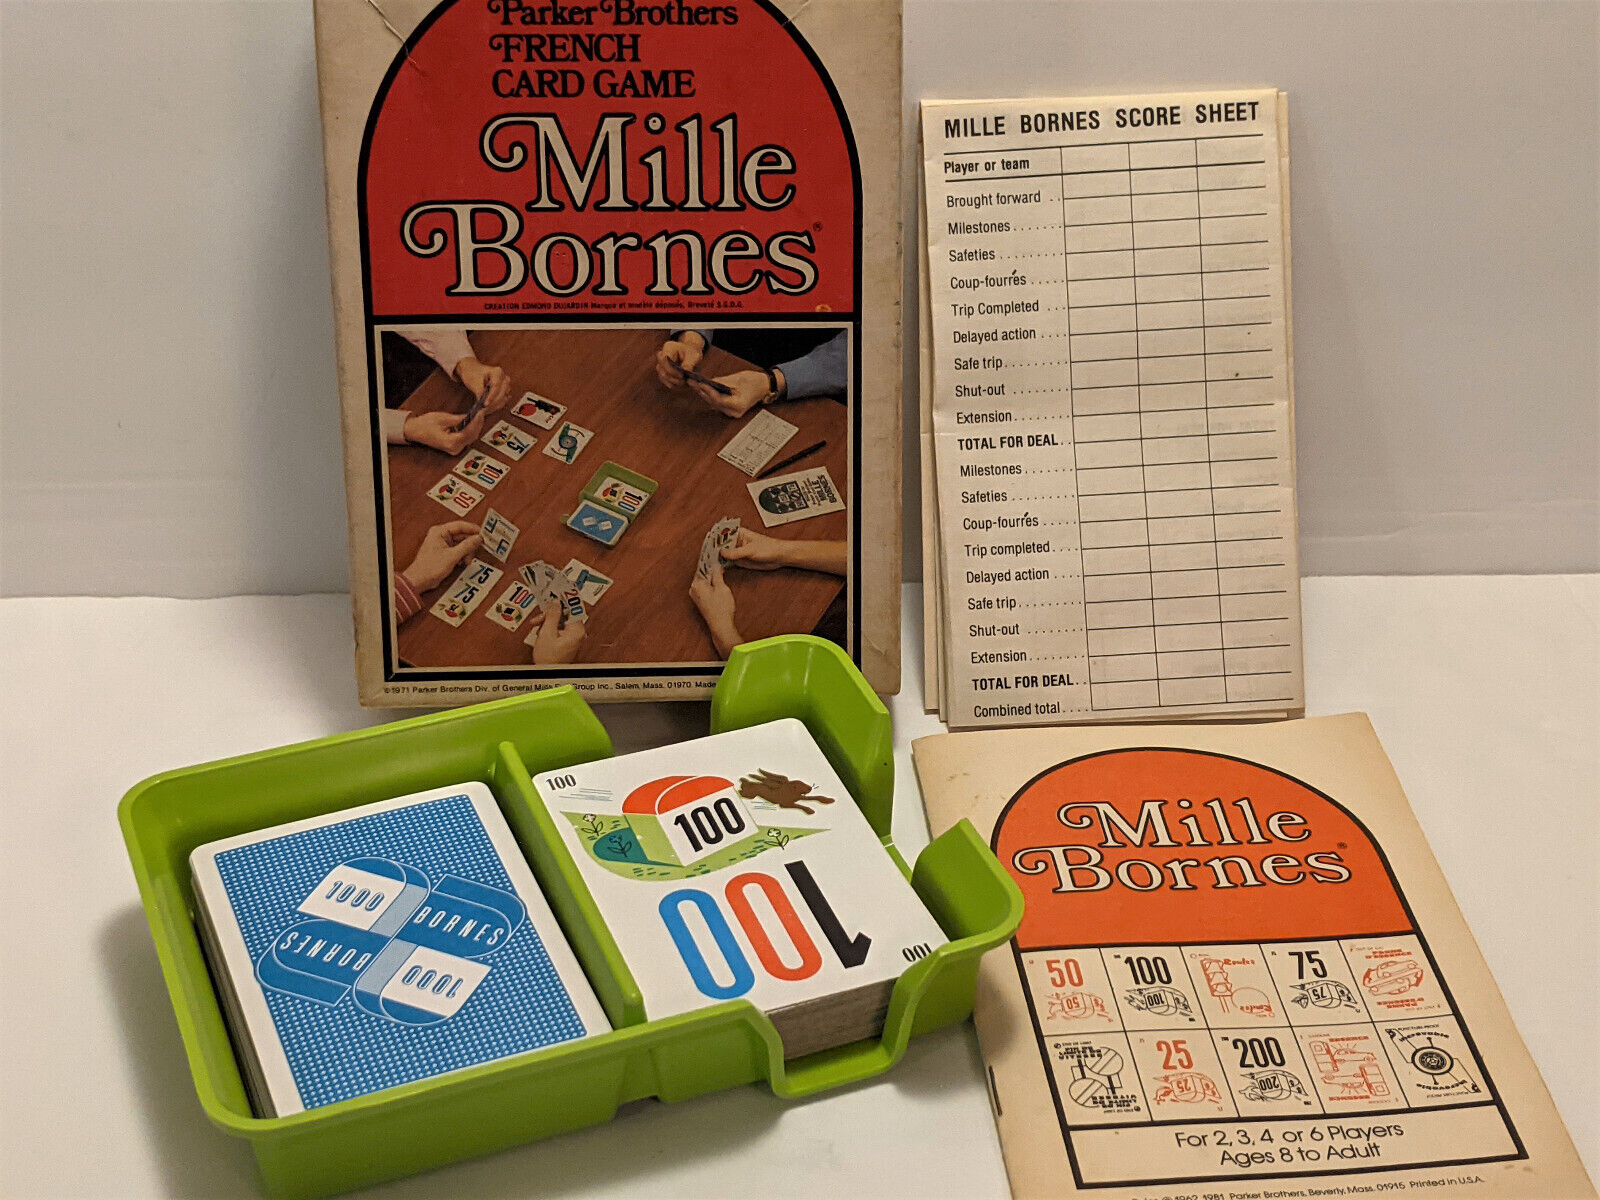 MILLE BORNES French Card Game VTG 1971 #13 Parker Brothers Made in USA